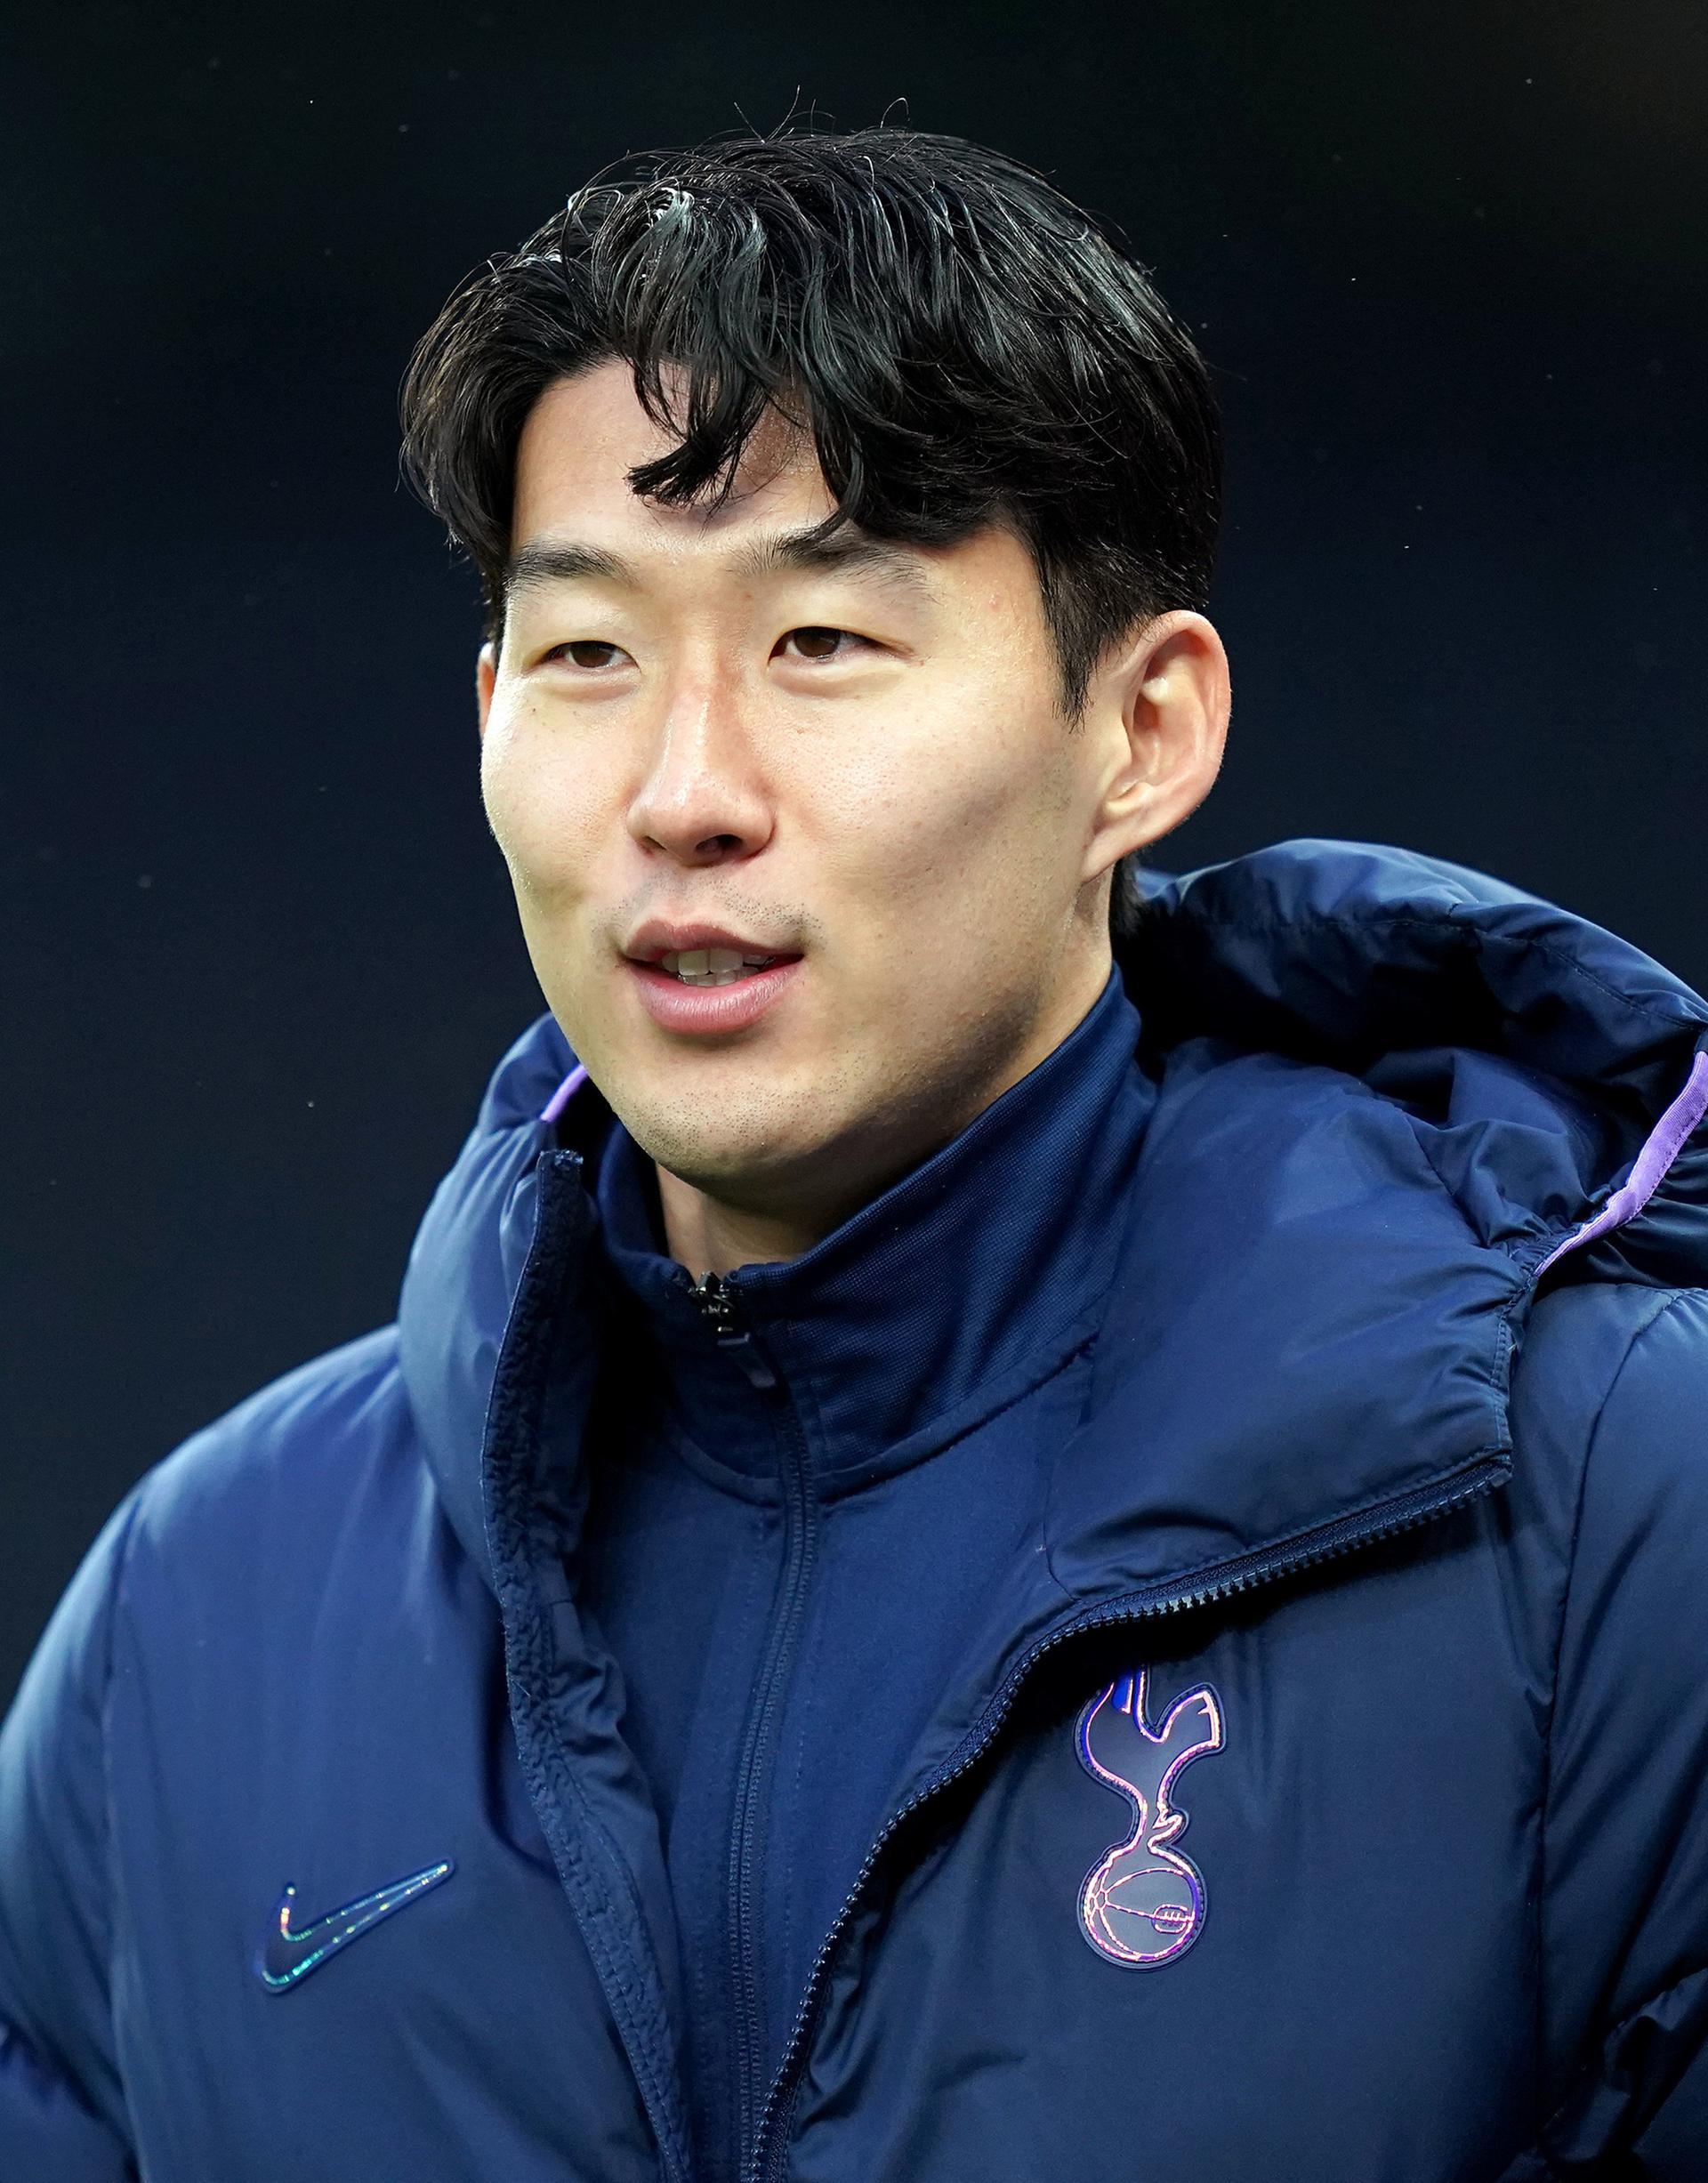 Tottenham star Son Heung-min pictured with gun and wearing army